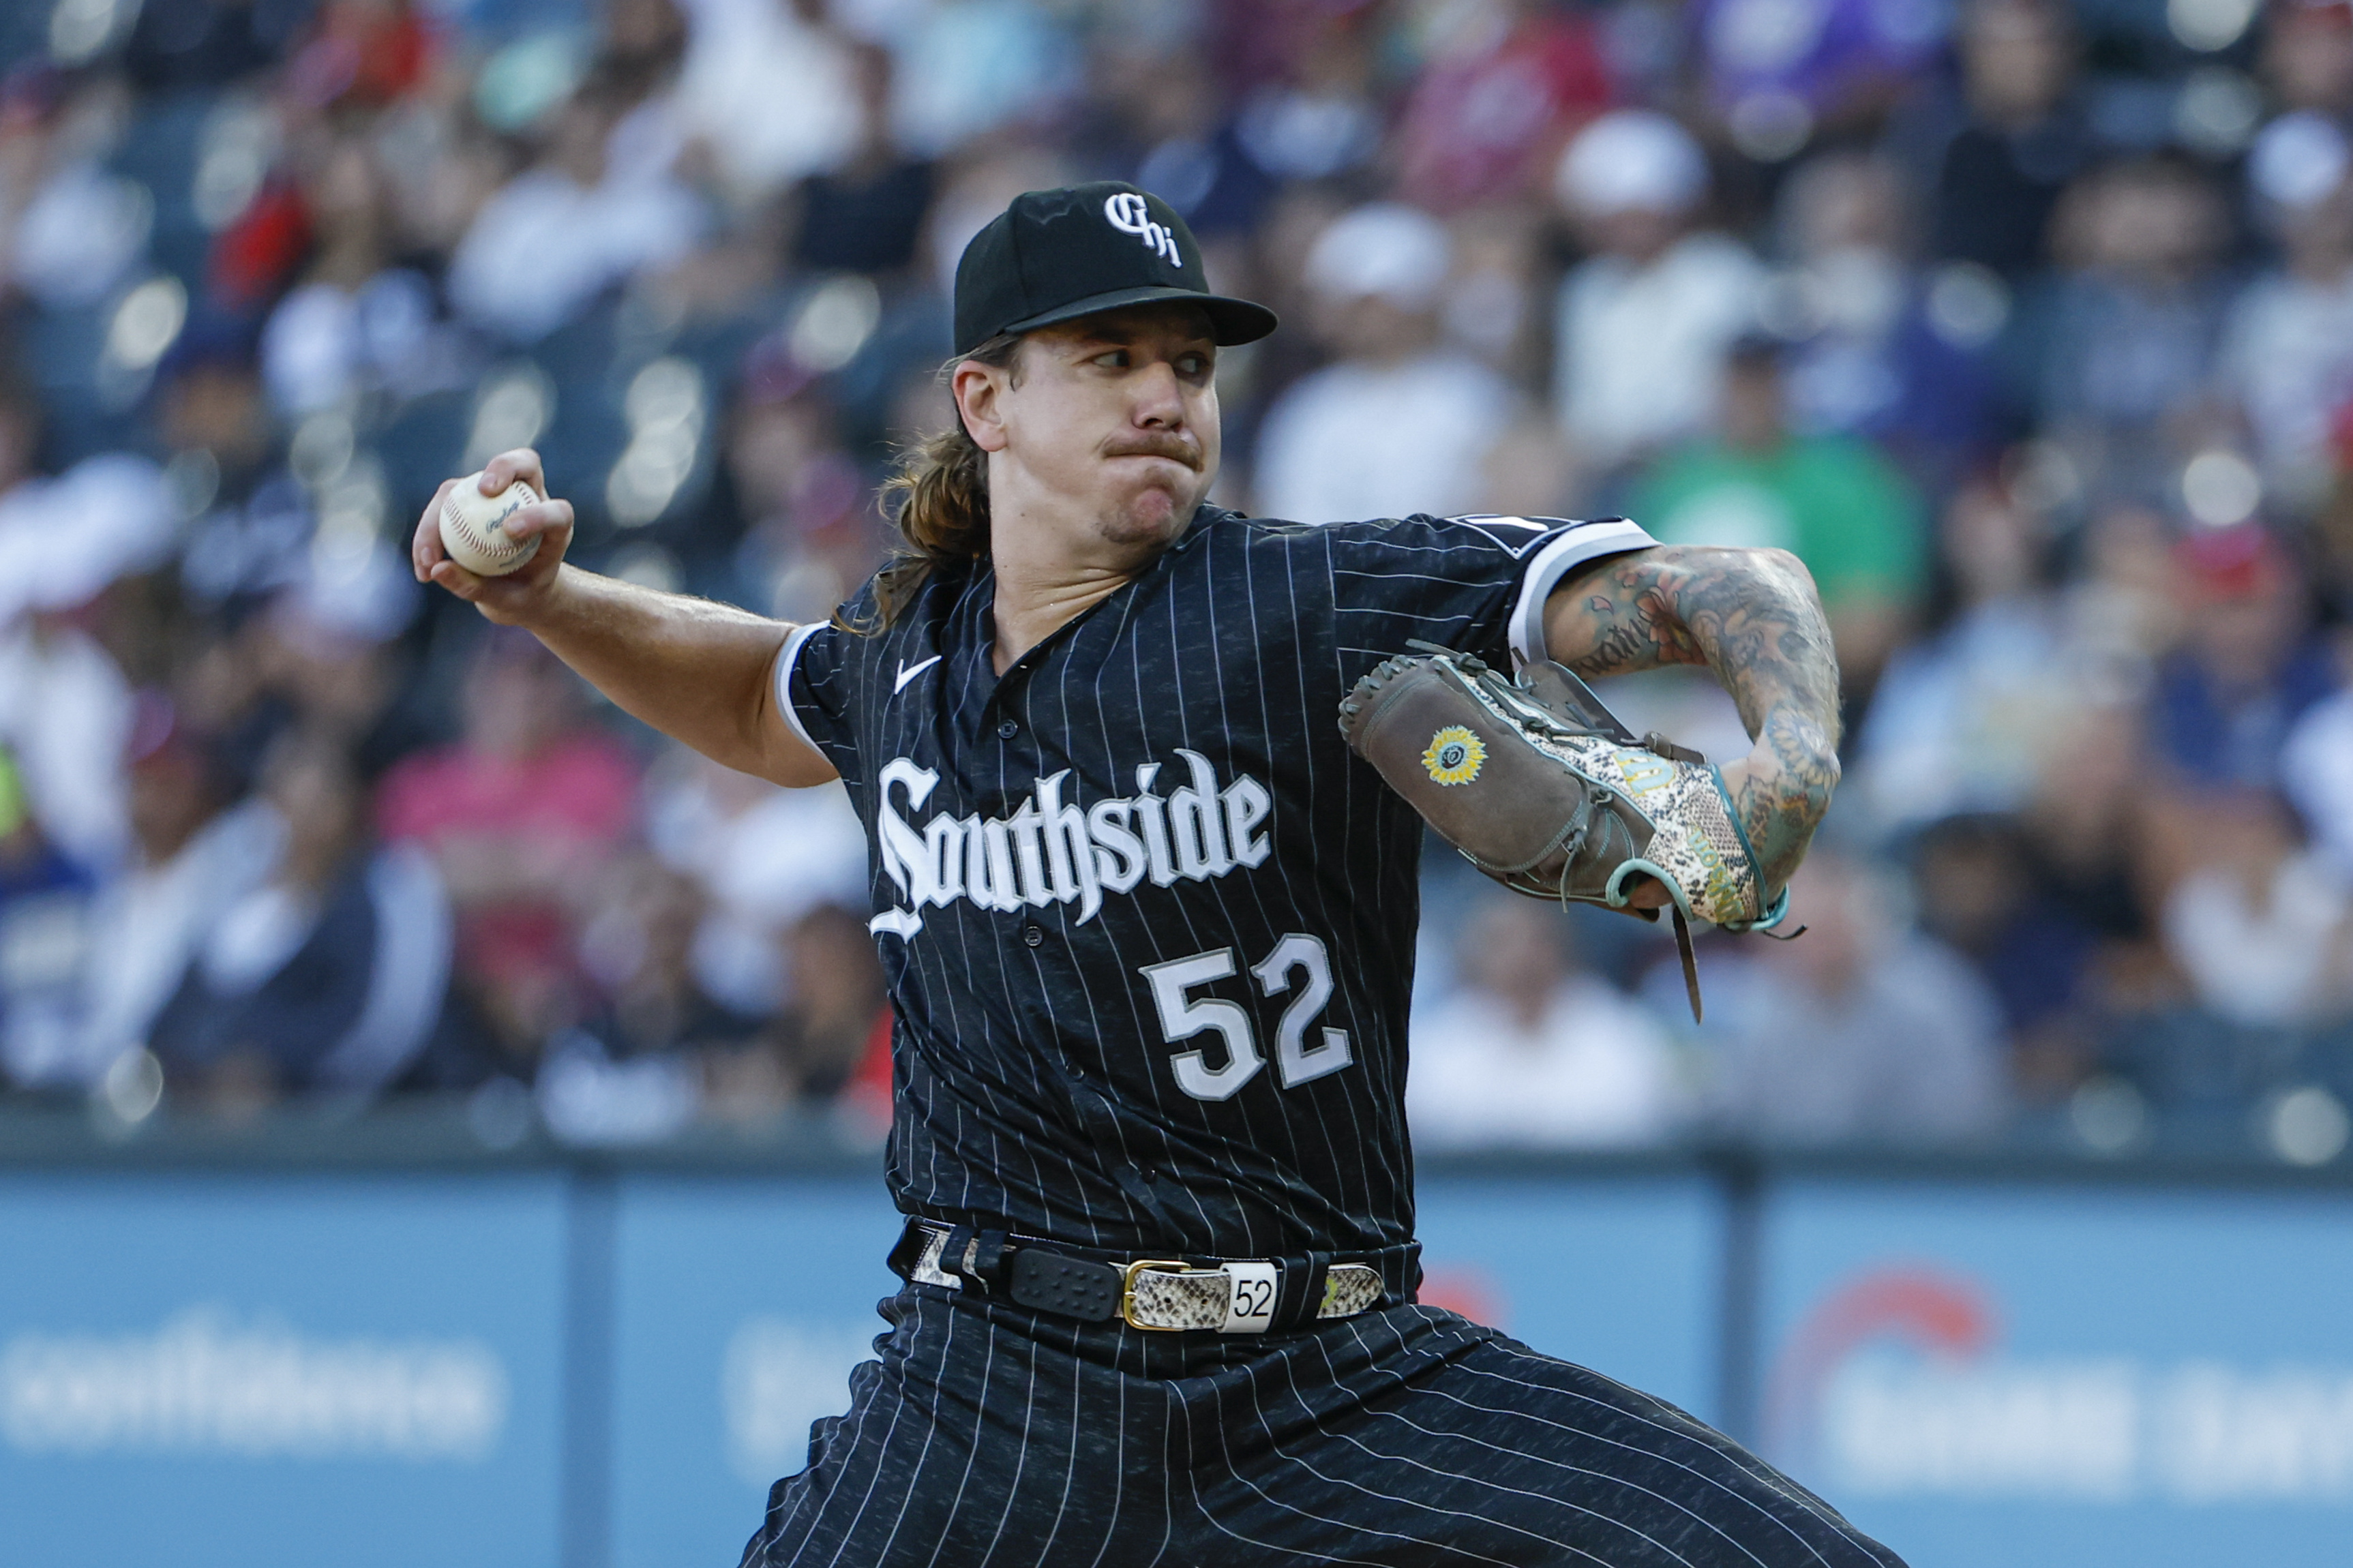 South Side Sox White Sox Player of the Week: Andrew Vaughn - South